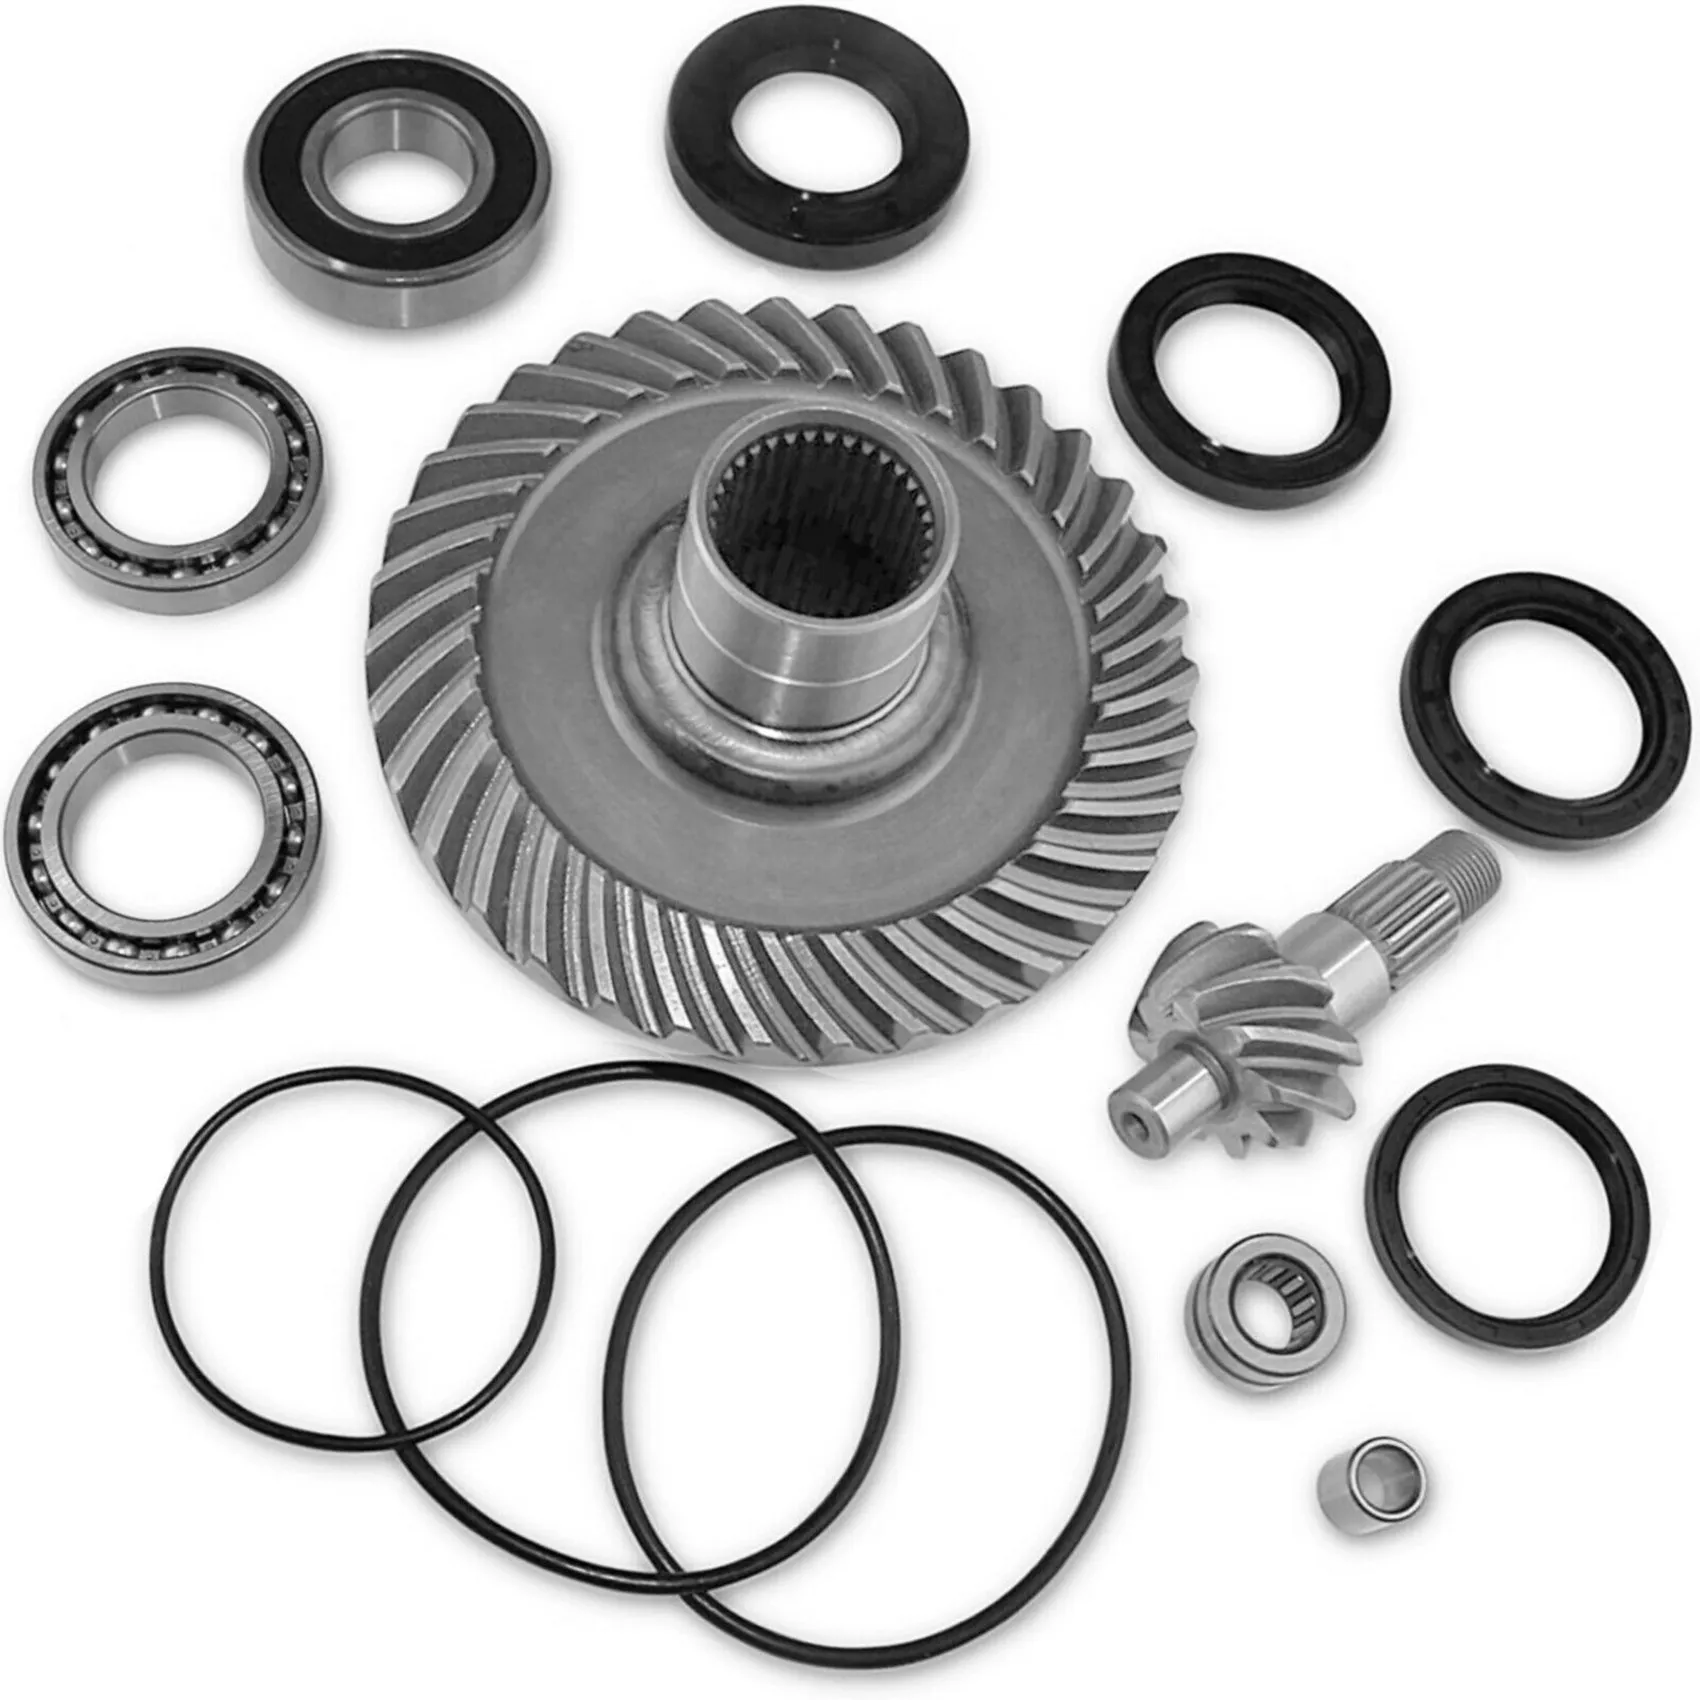 

For TRX300FW Fourtrax Rear Differential Ring&Pinion Gear+Bearing Kit 88-00 127447